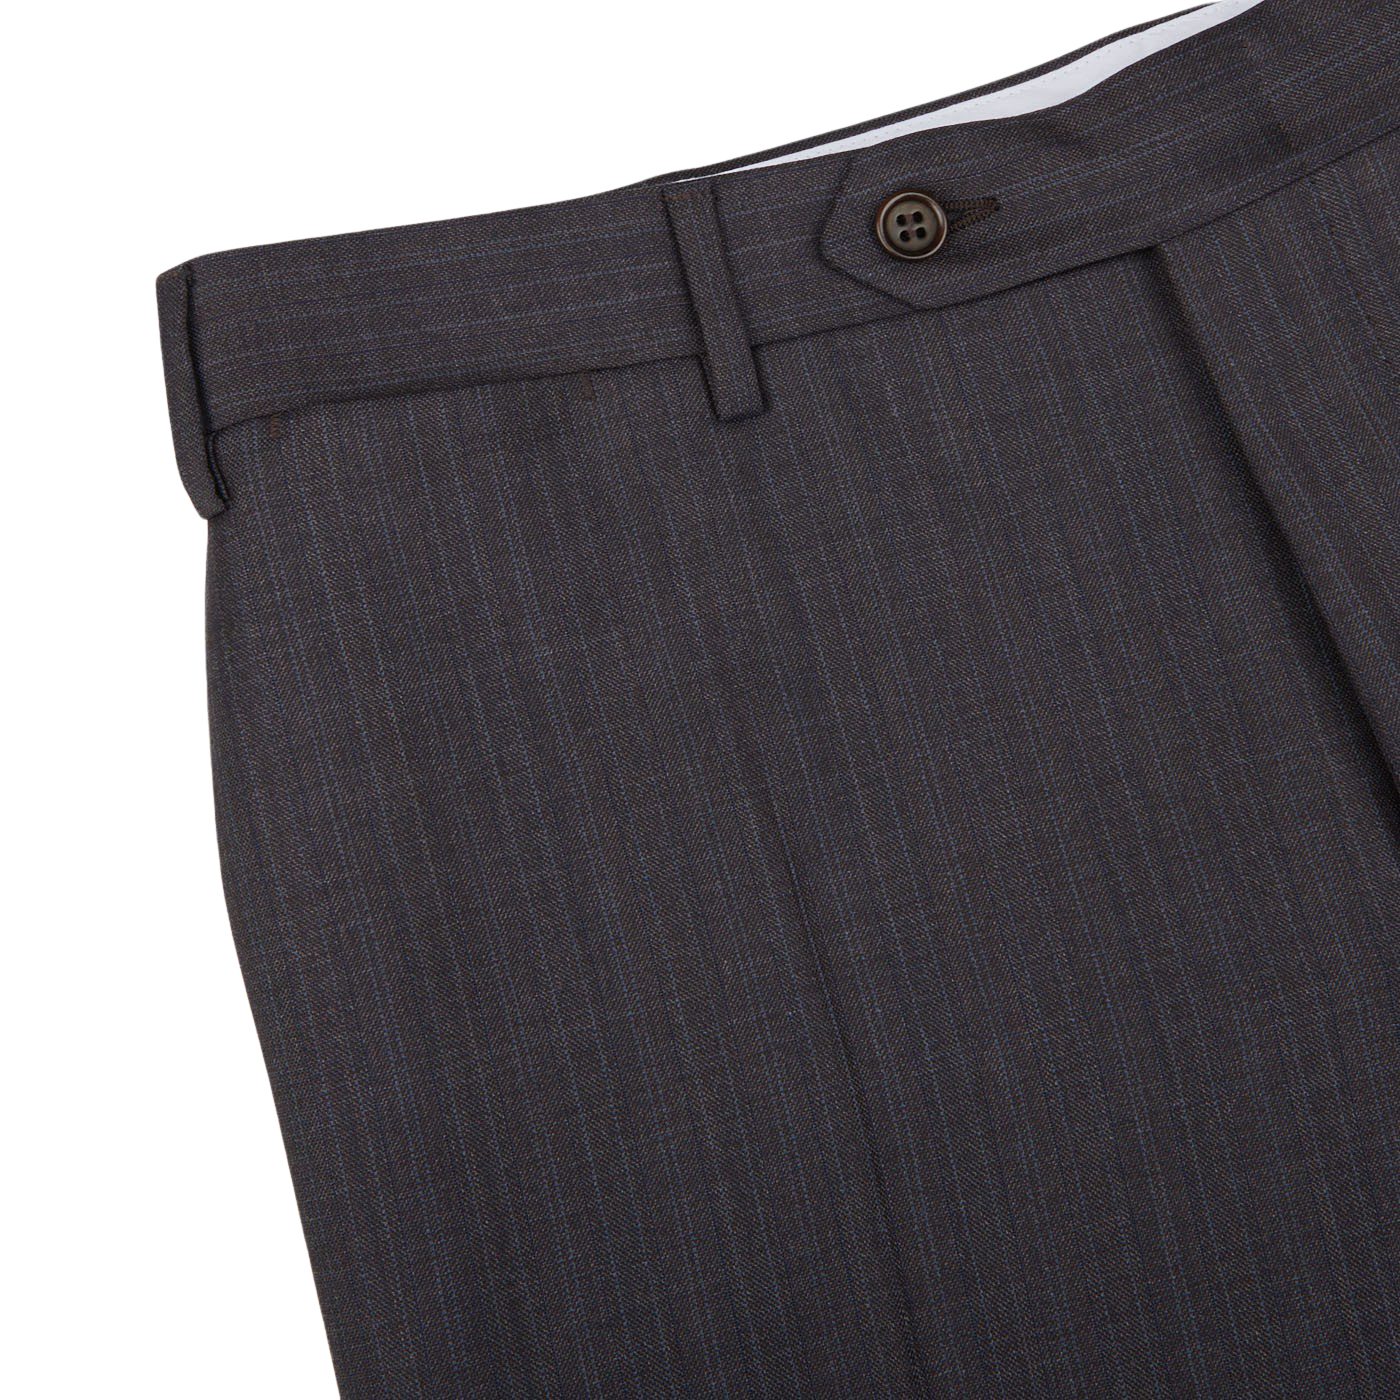 A close up of Canali Blue Brown Melange Striped Wool Suit pants.